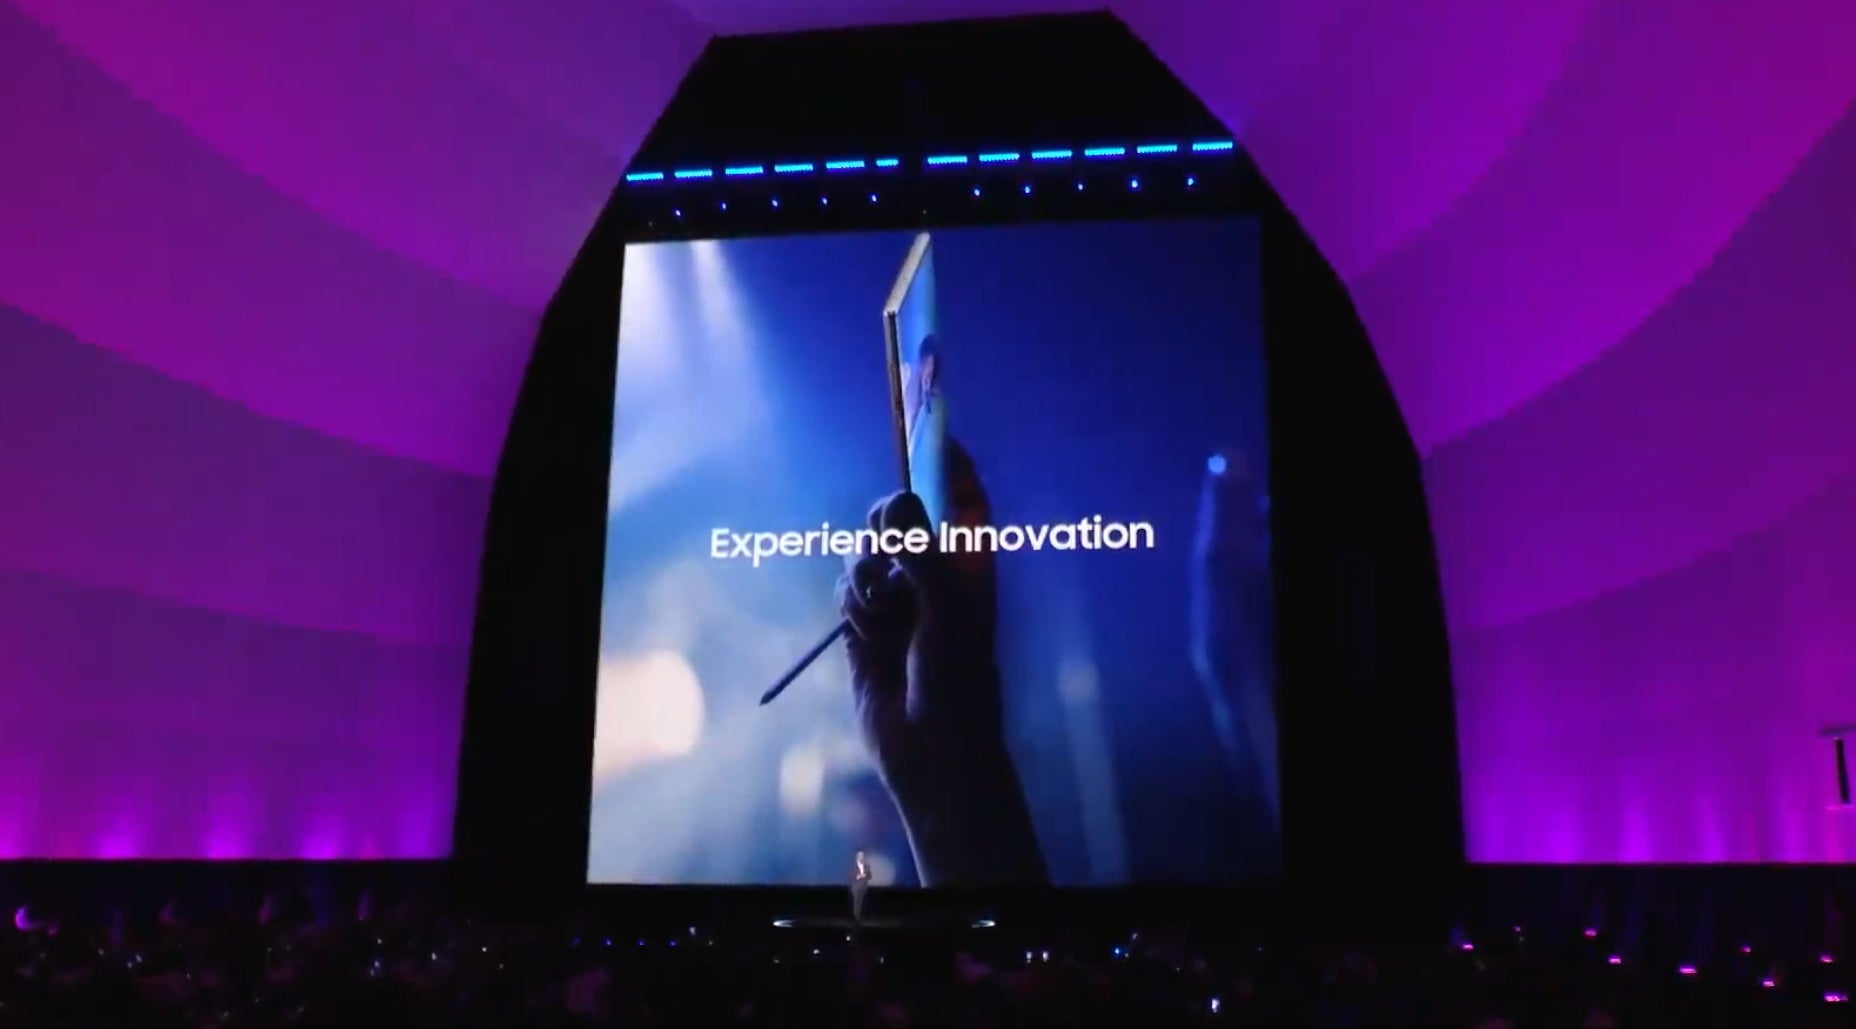 Samsung Electronics CEO DJ Koh presented Samsung's vision for the future at the Unpacked event in Brooklyn, New York